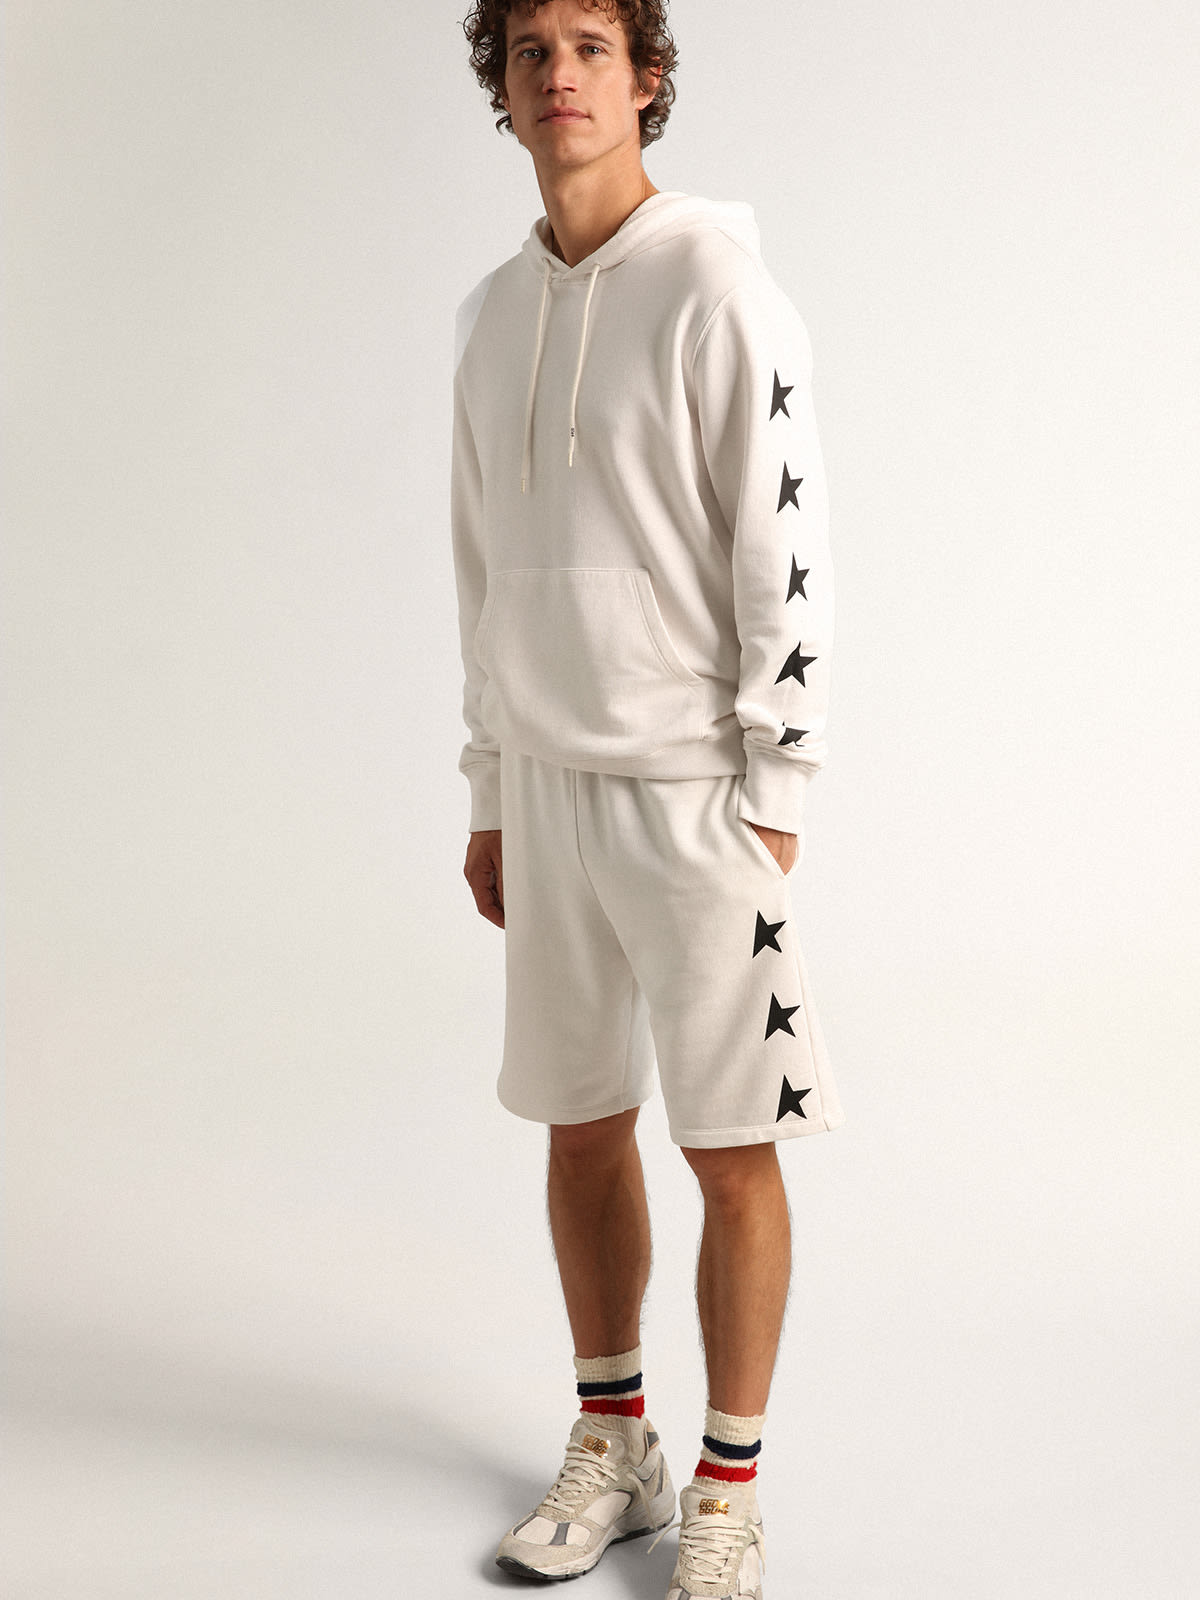 Golden Goose - Diego Star Collection Bermuda shorts in vintage white with contrasting black stars in 